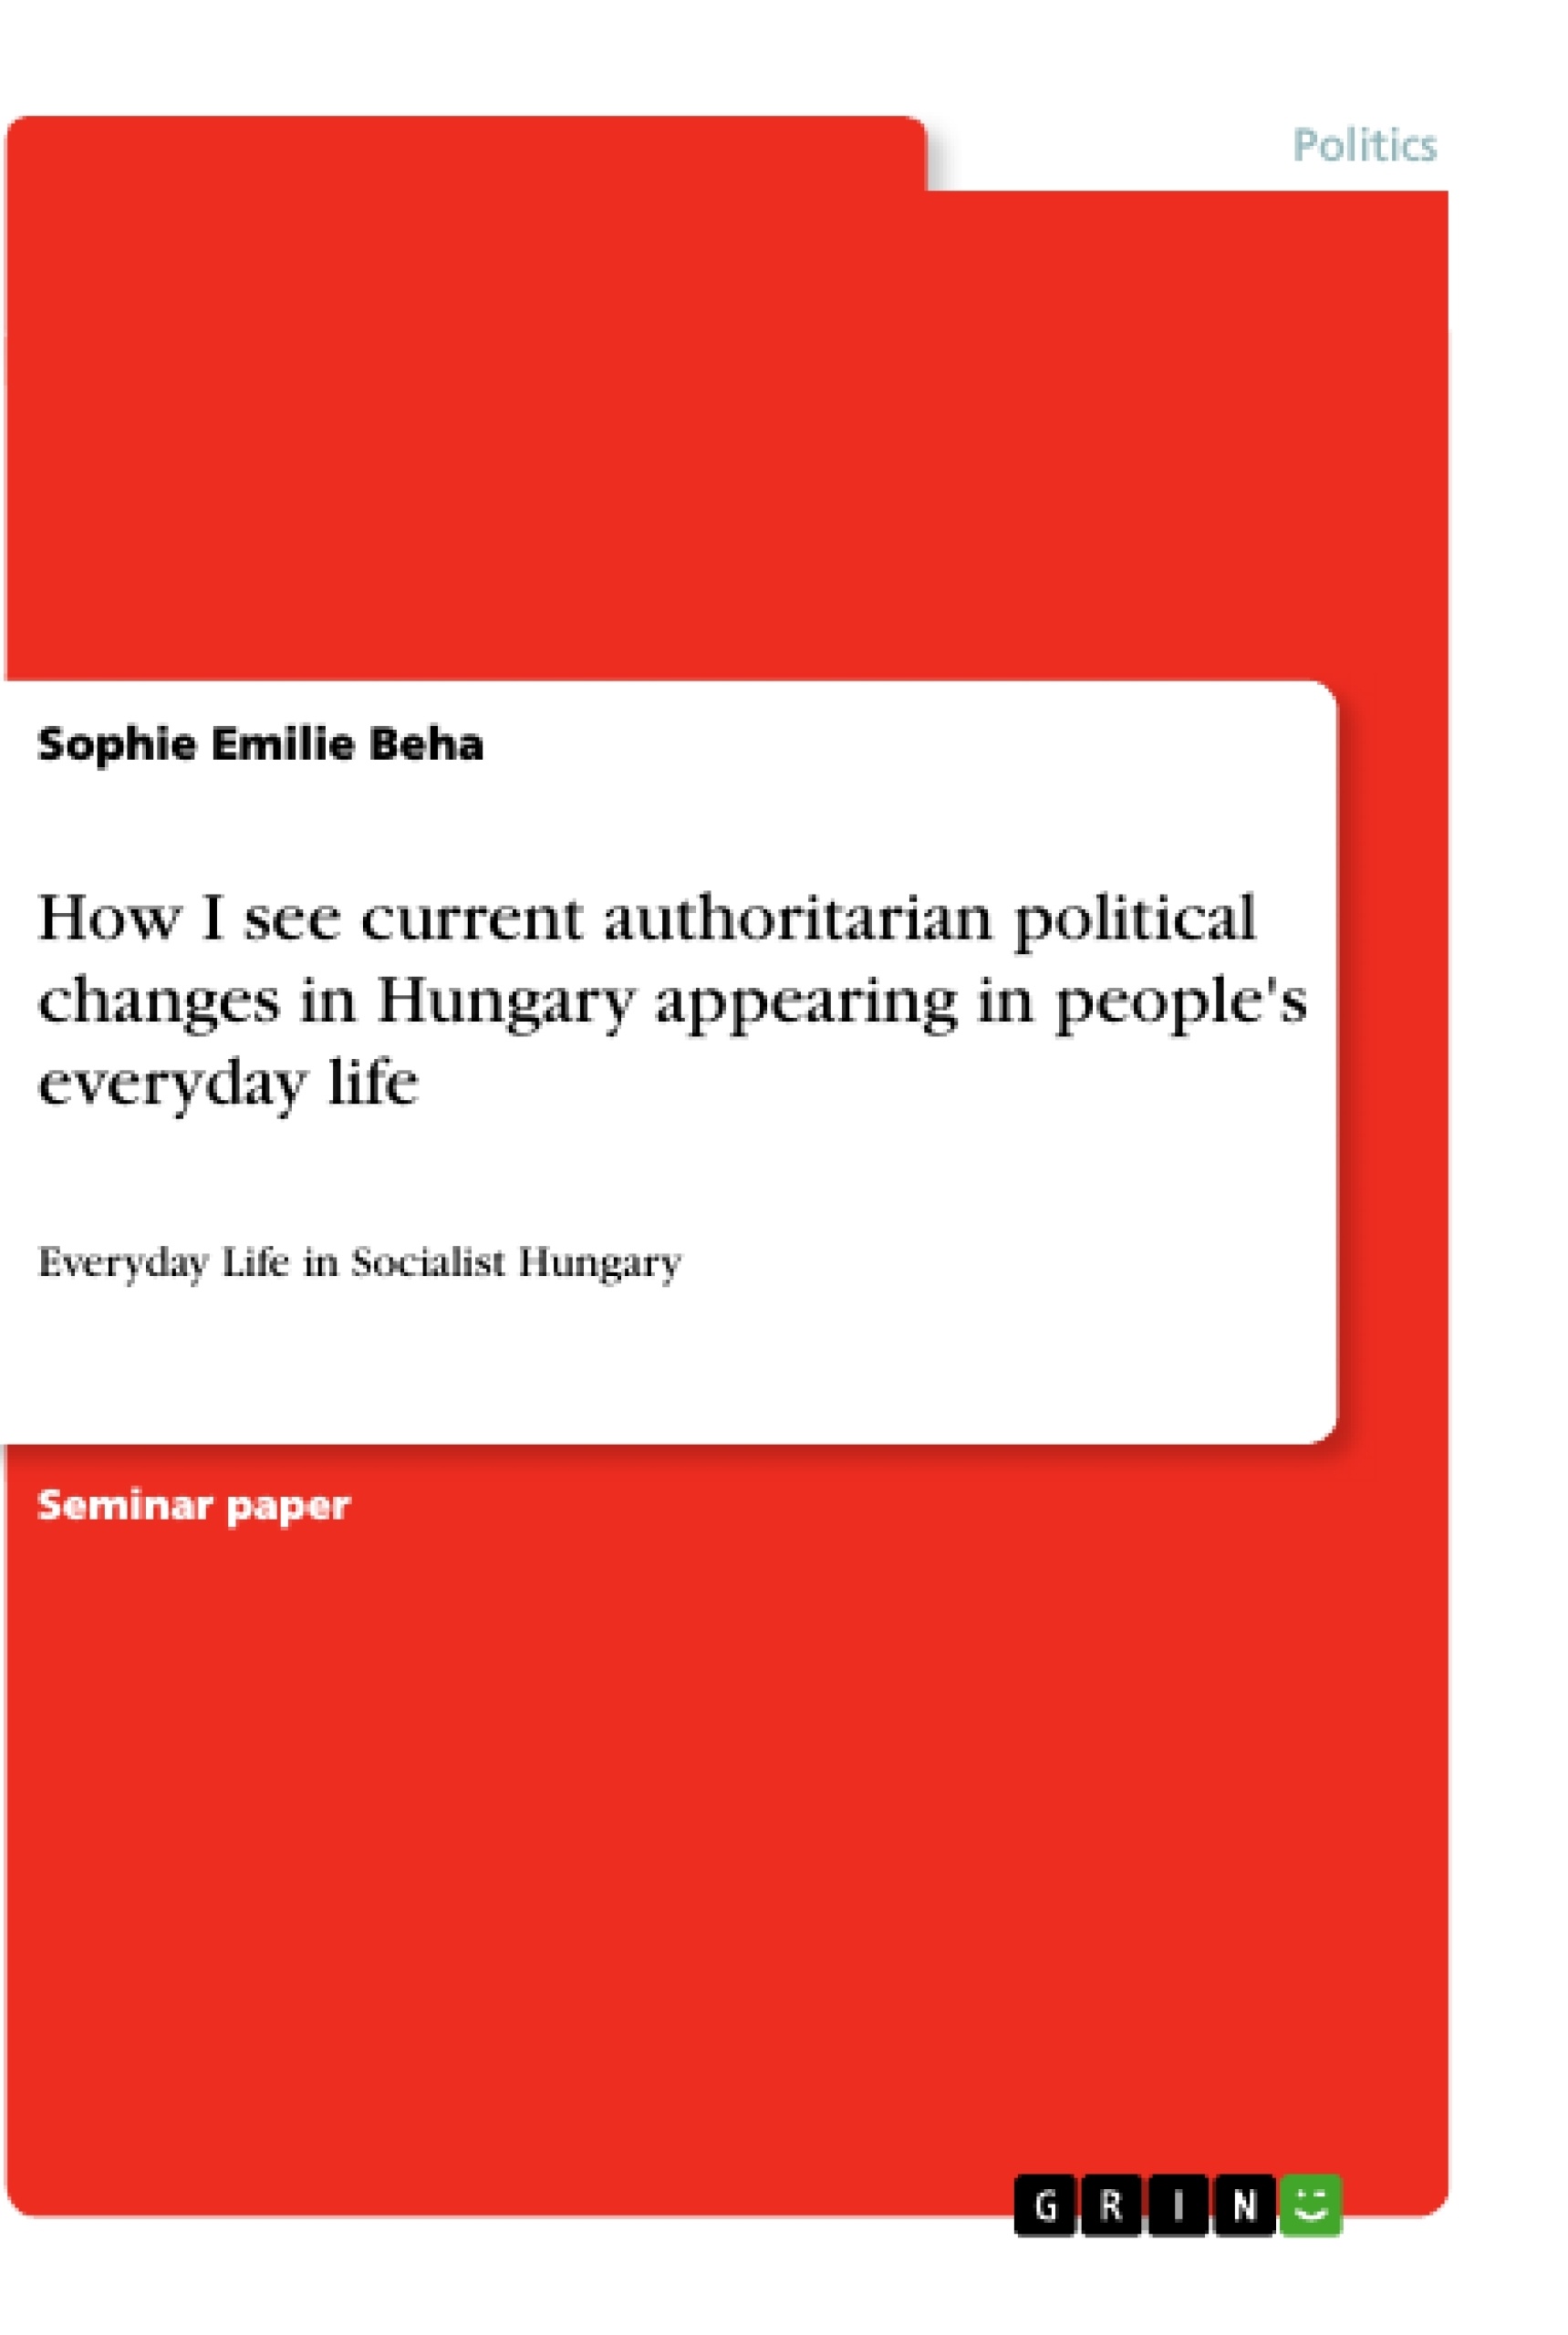 Título: How I see current authoritarian political changes in Hungary appearing in people's everyday life